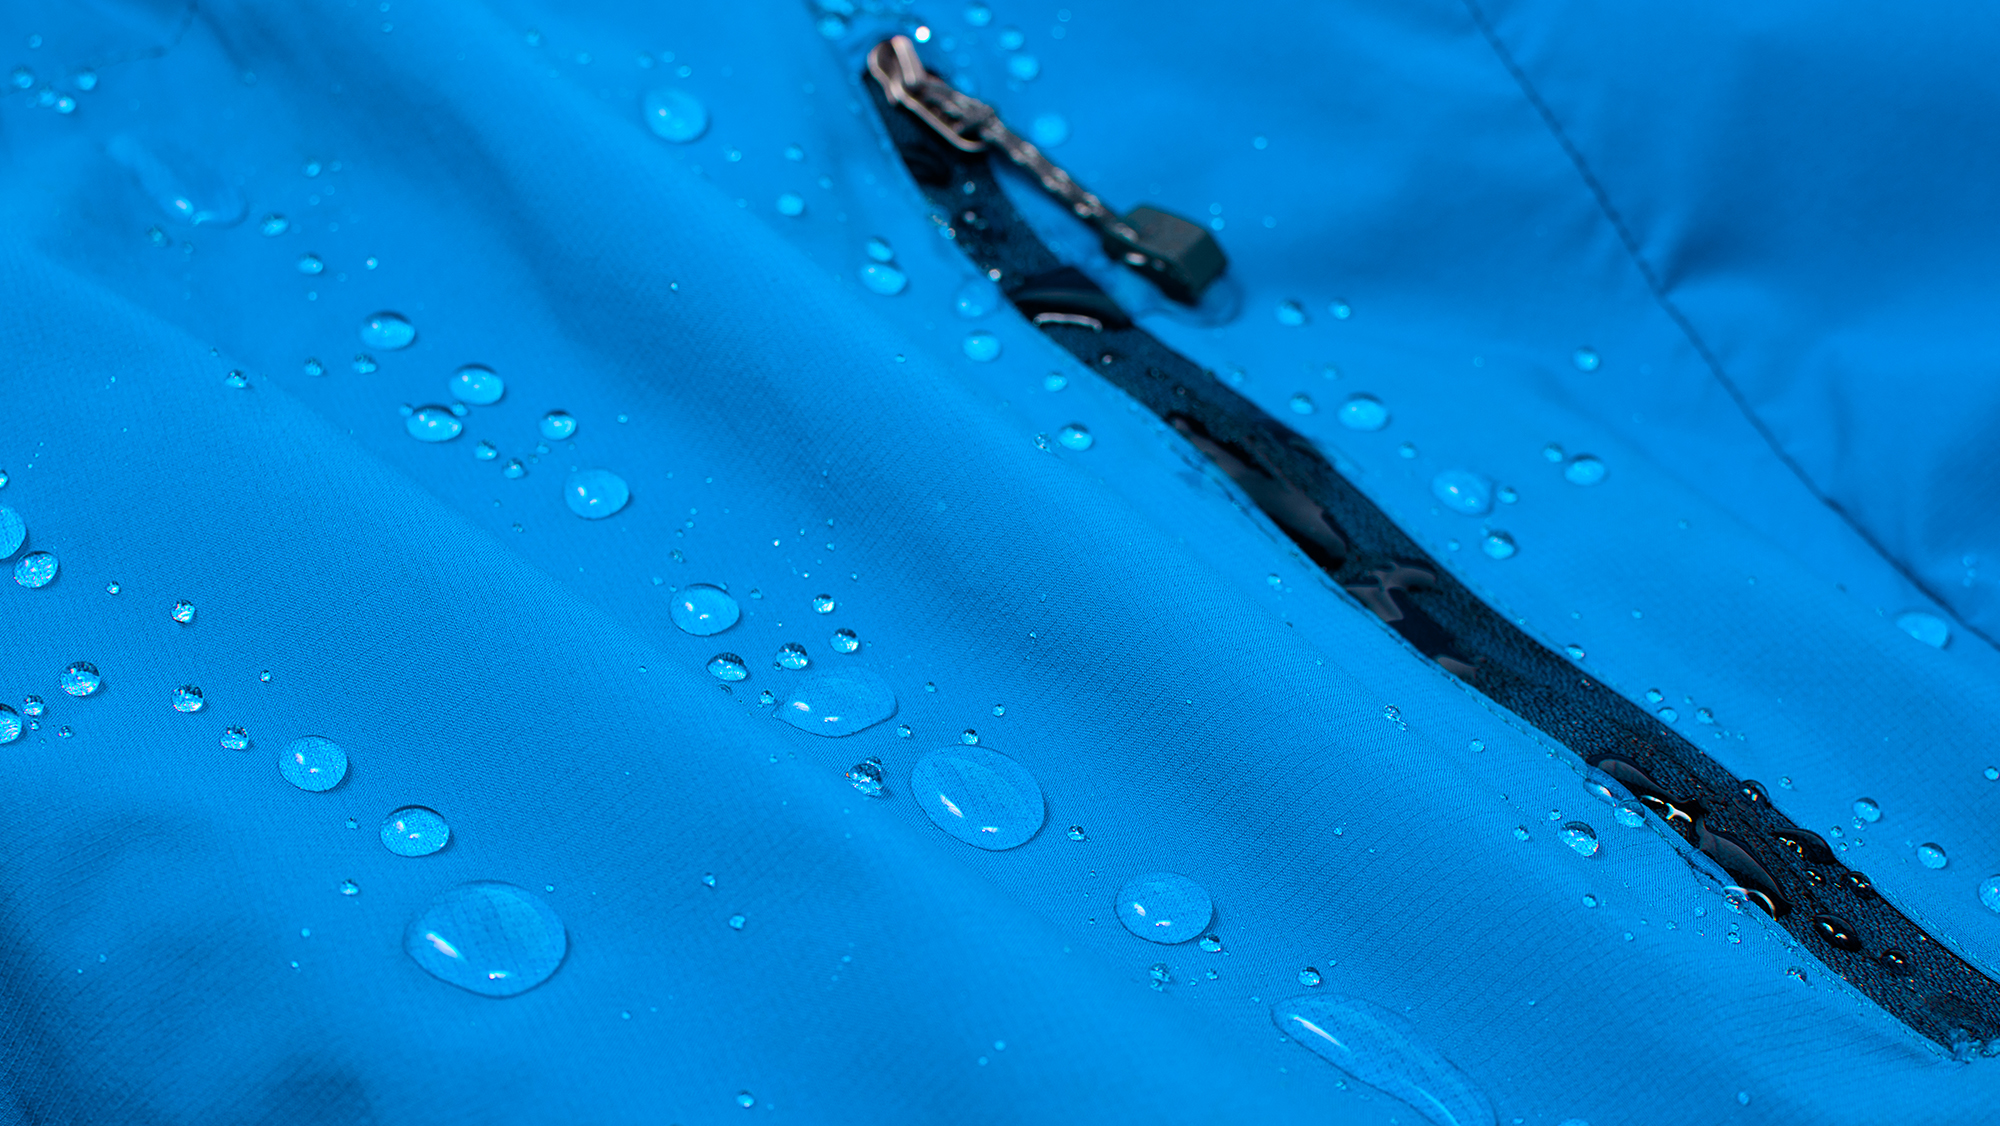 A polymeric material shows waterproof properties.